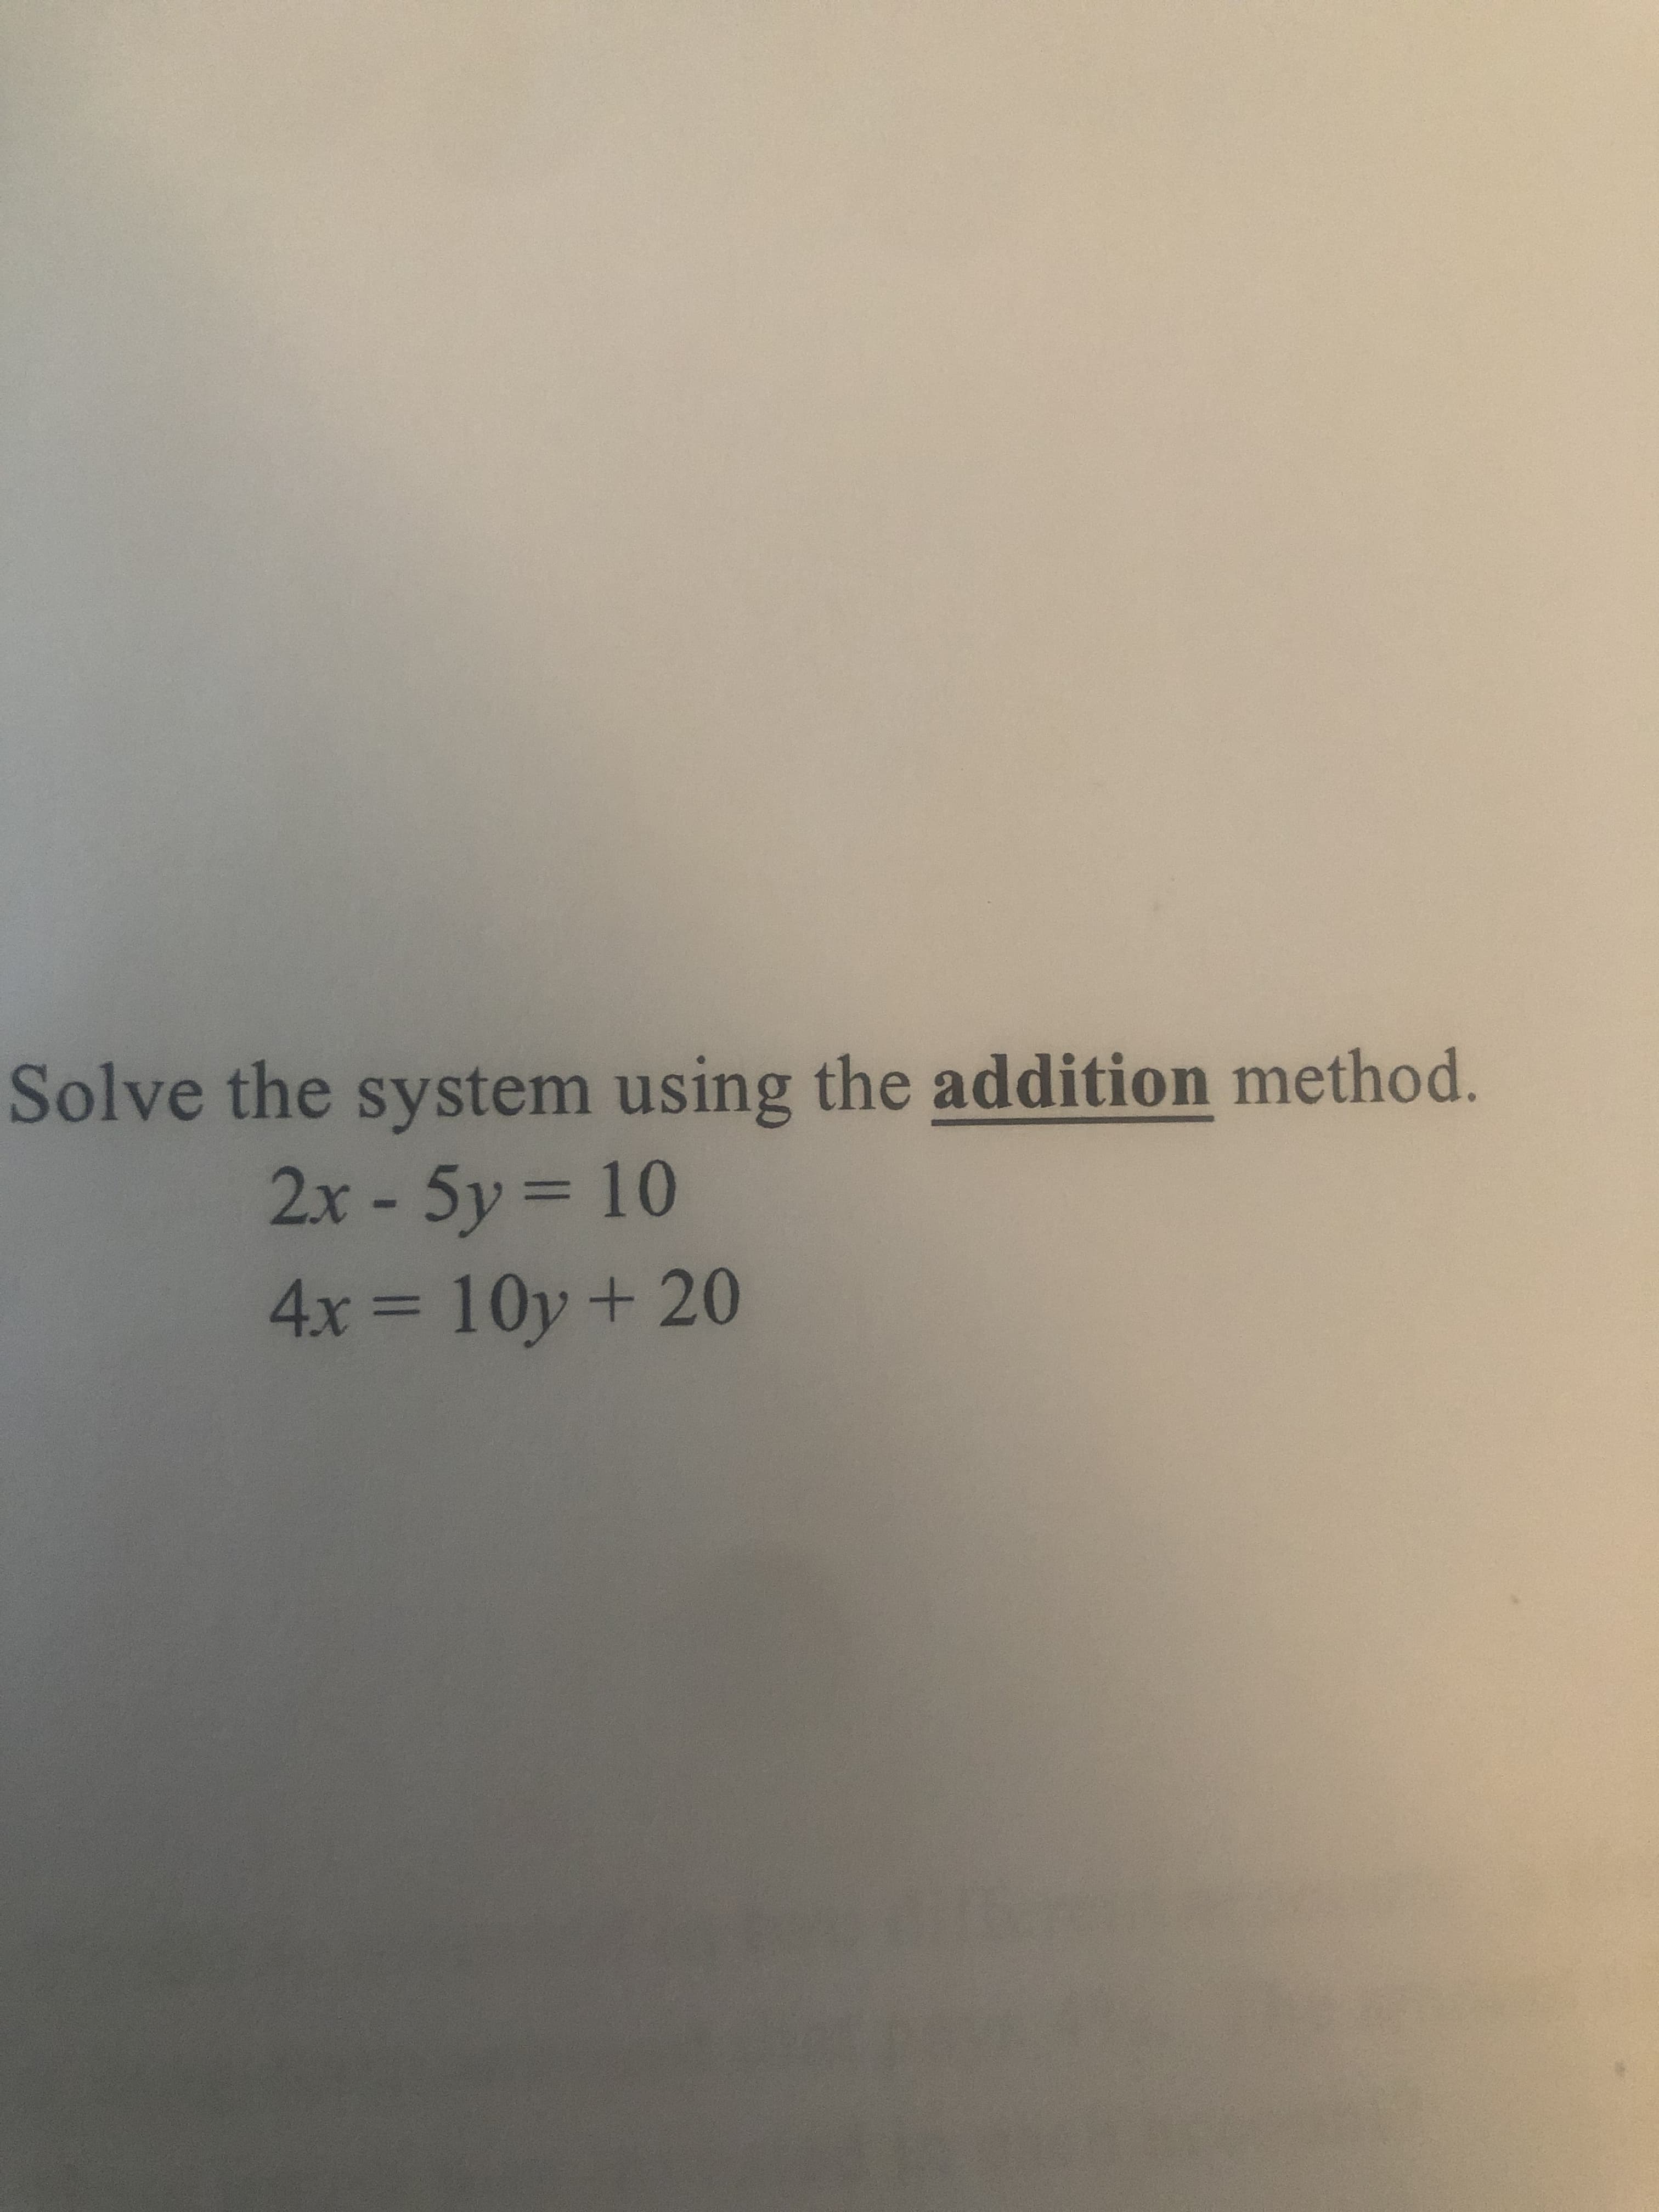 Solve the system using the addition method.
2x - 5y = 10
4x 10y+ 20
%3D
